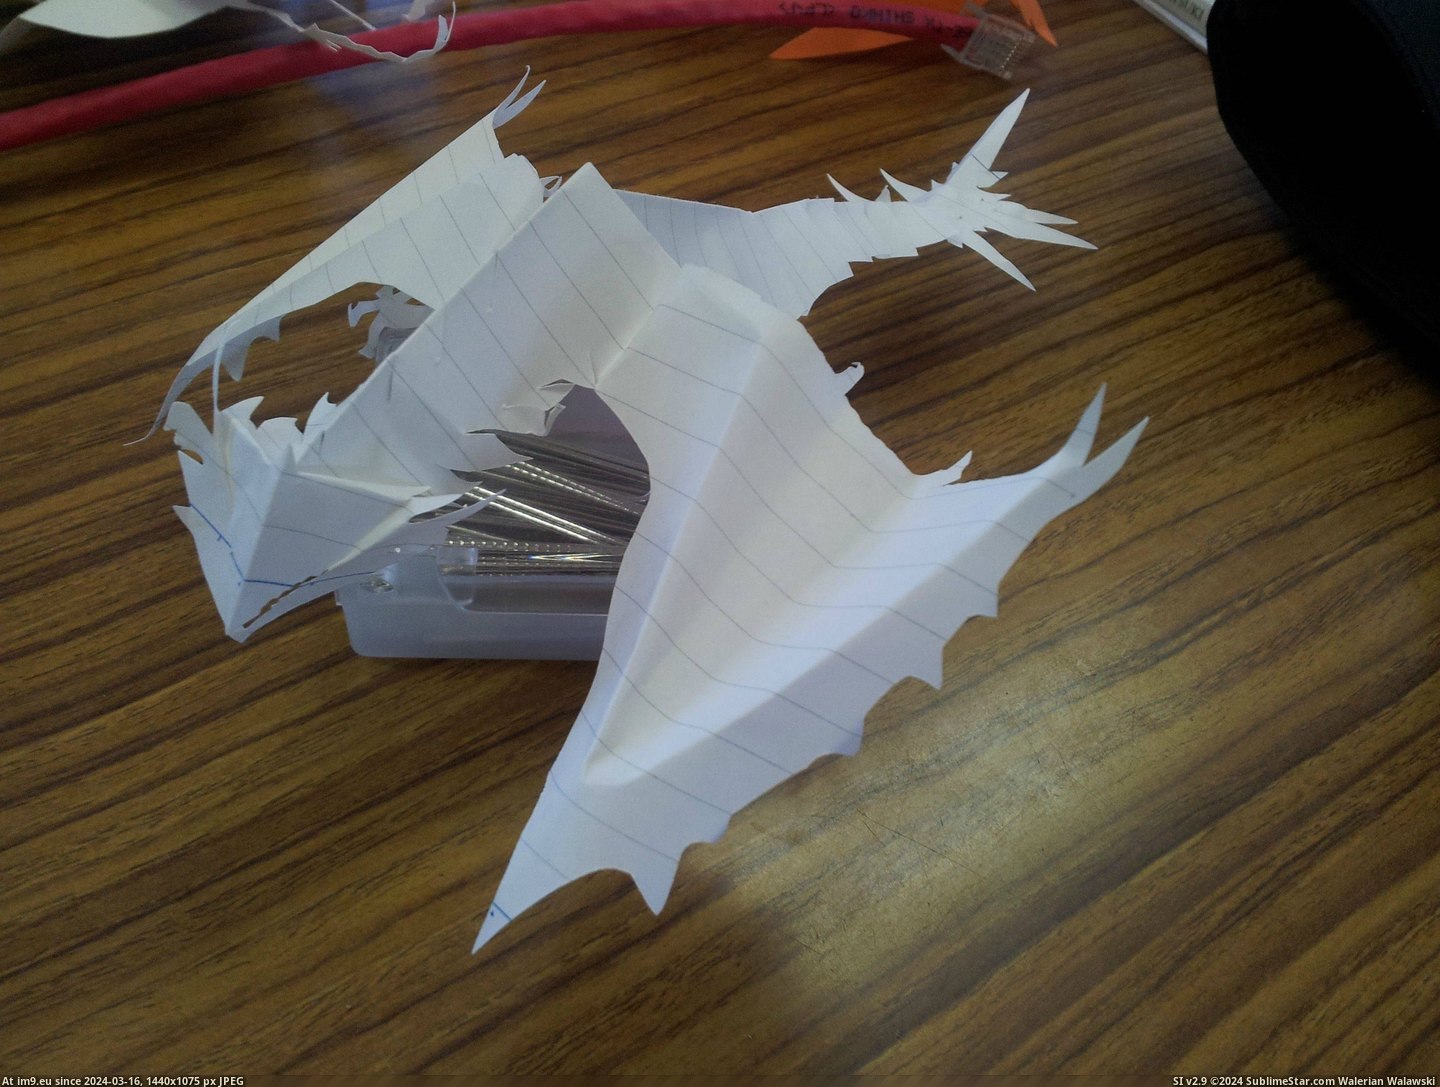 #One #Paper #Students #Creatures #Freehand #Bored #Completely [Pics] One of my students makes these creatures out of paper completely freehand whenever he is bored 4 Pic. (Obraz z album My r/PICS favs))